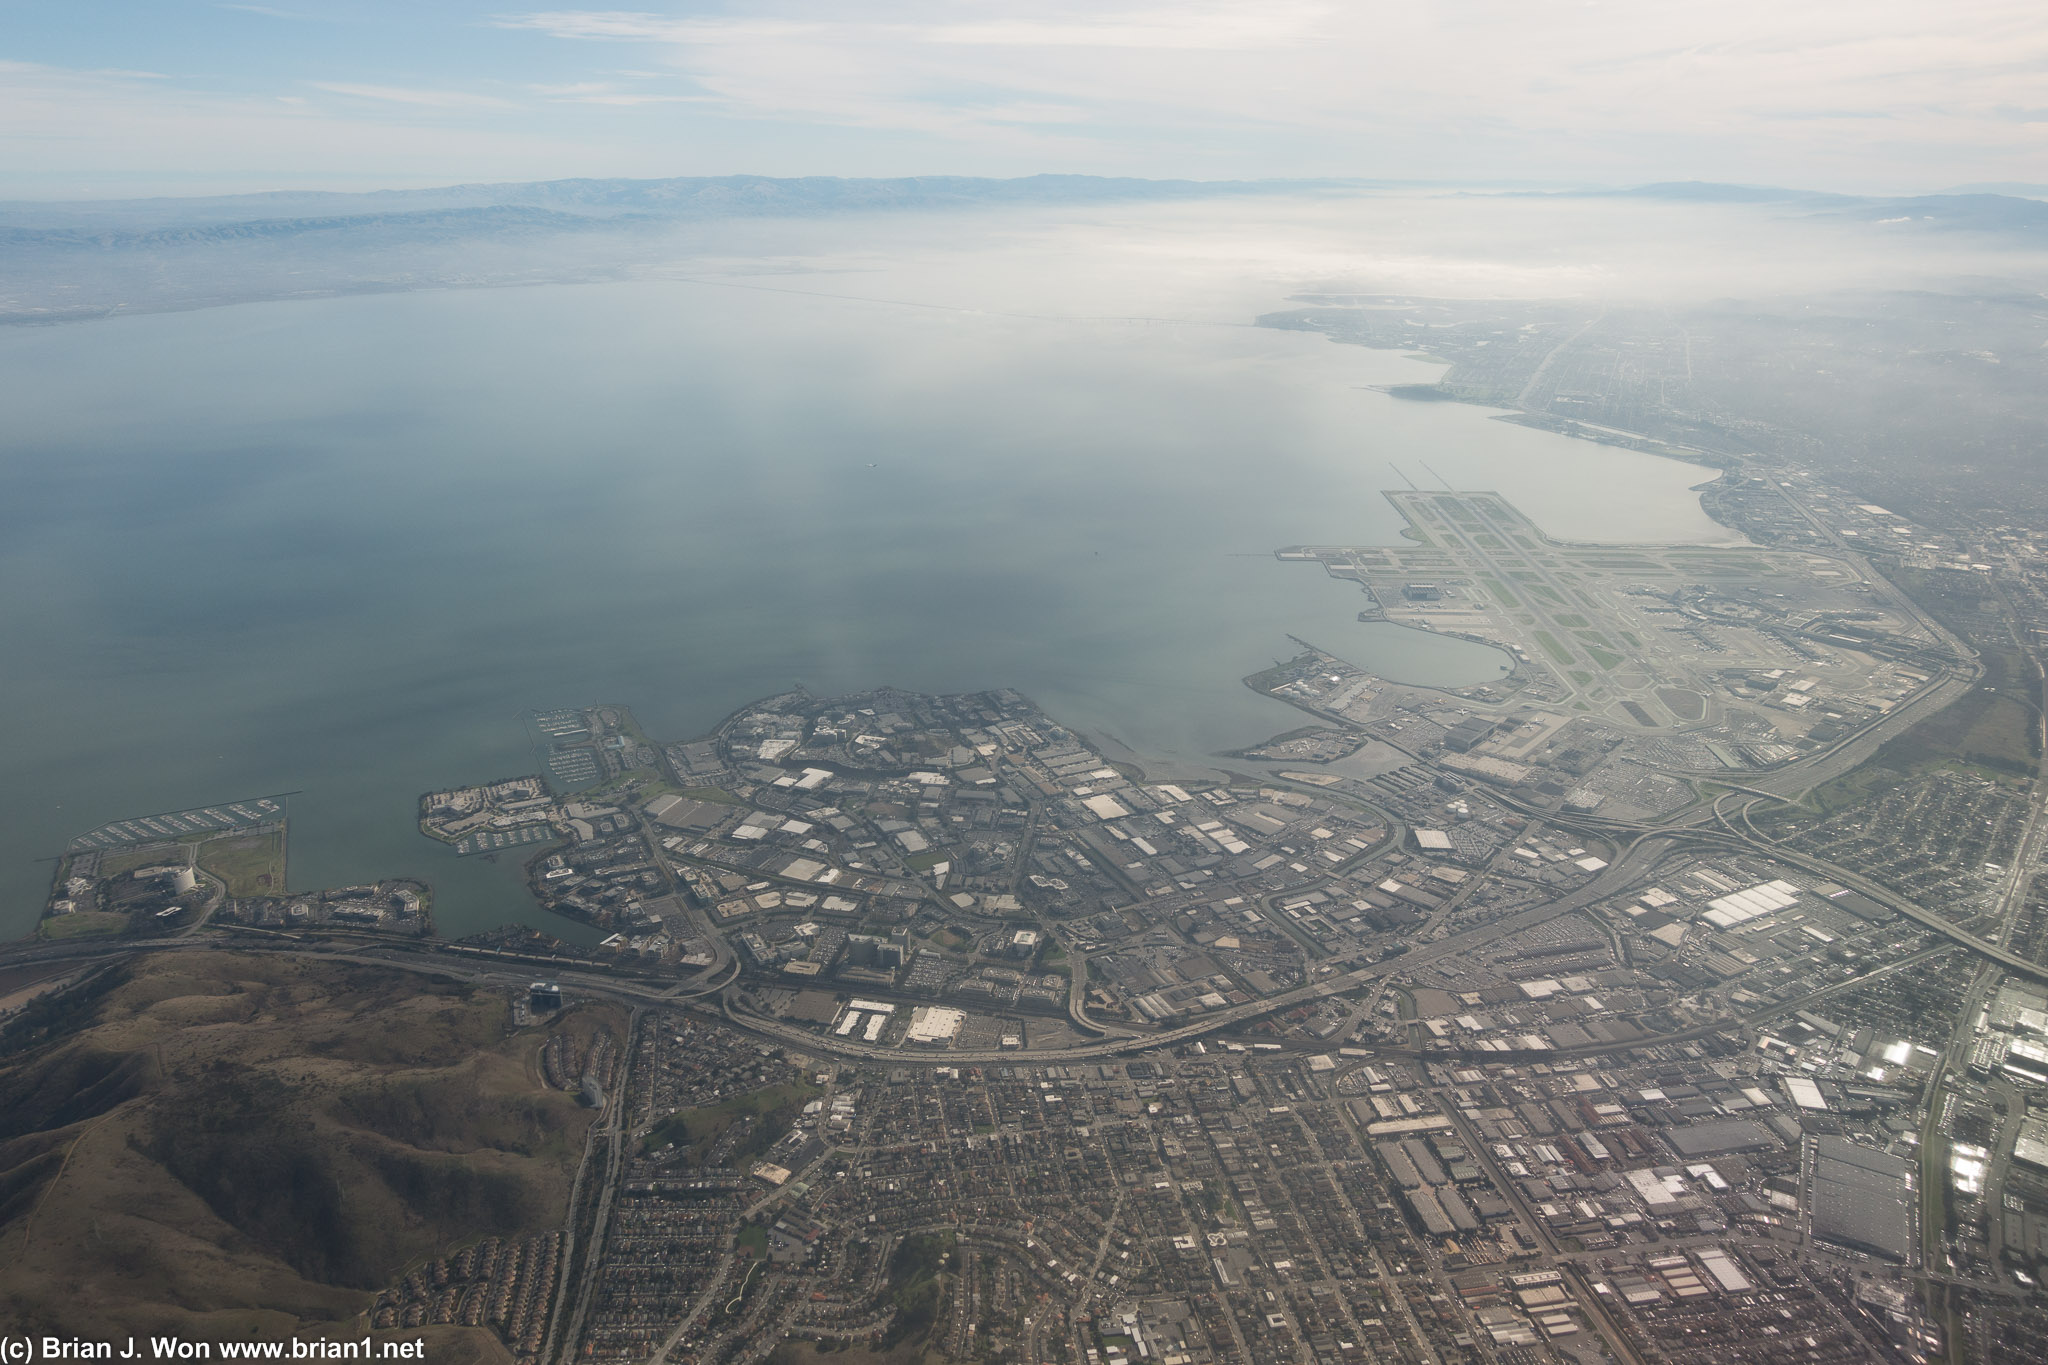 Taking off from SFO.